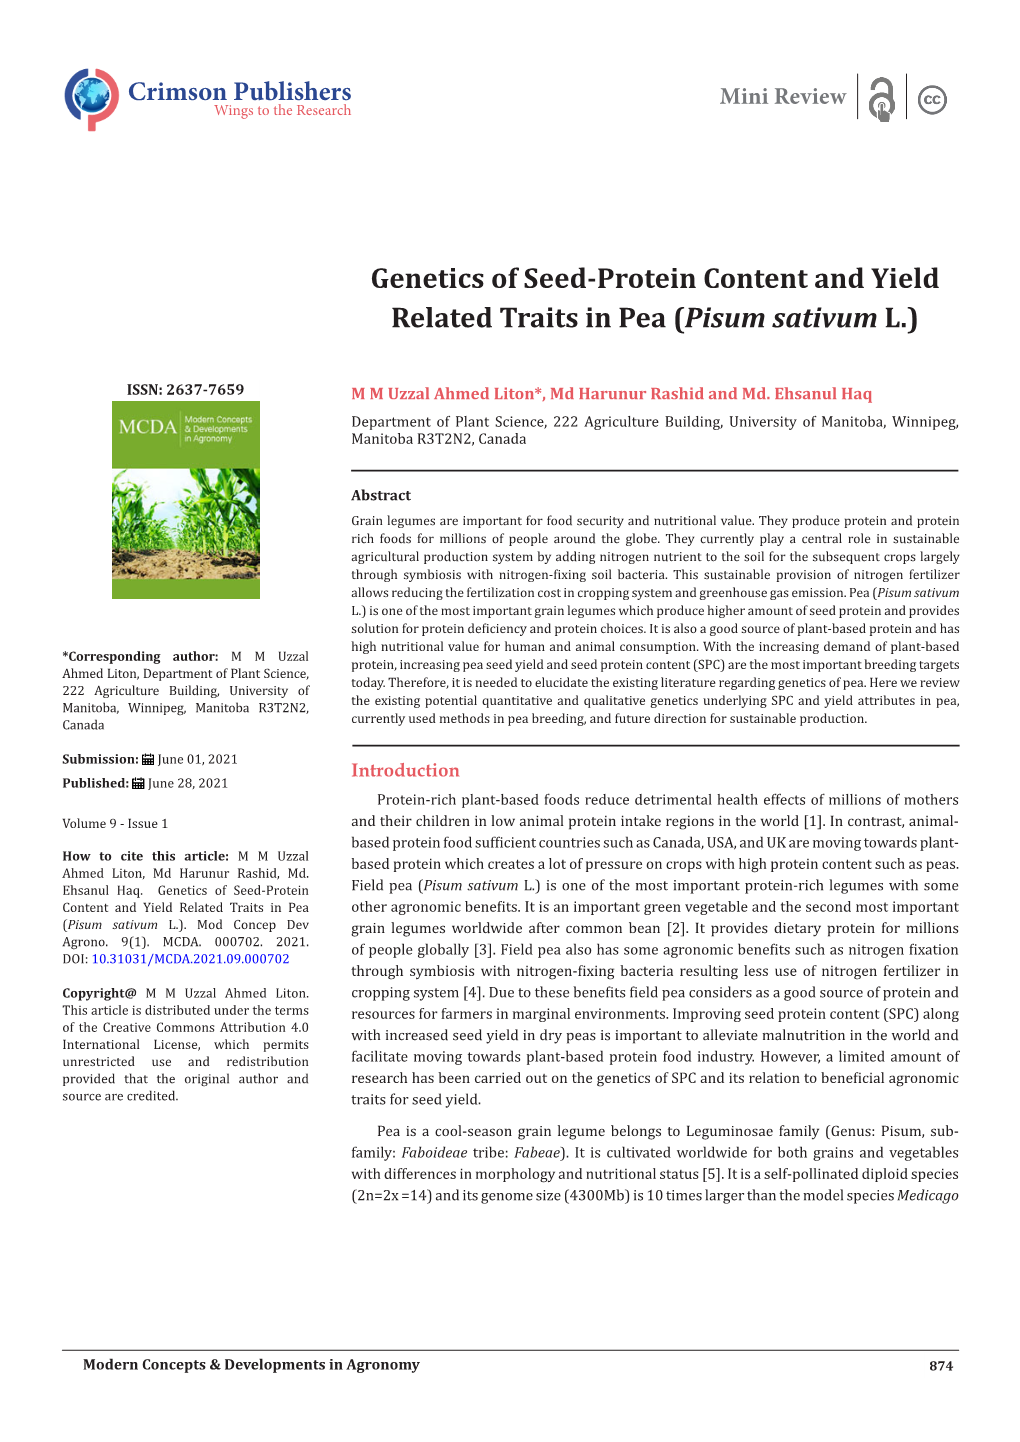 Genetics of Seed-Protein Content and Yield Related Traits in Pea (Pisum Sativum L.)